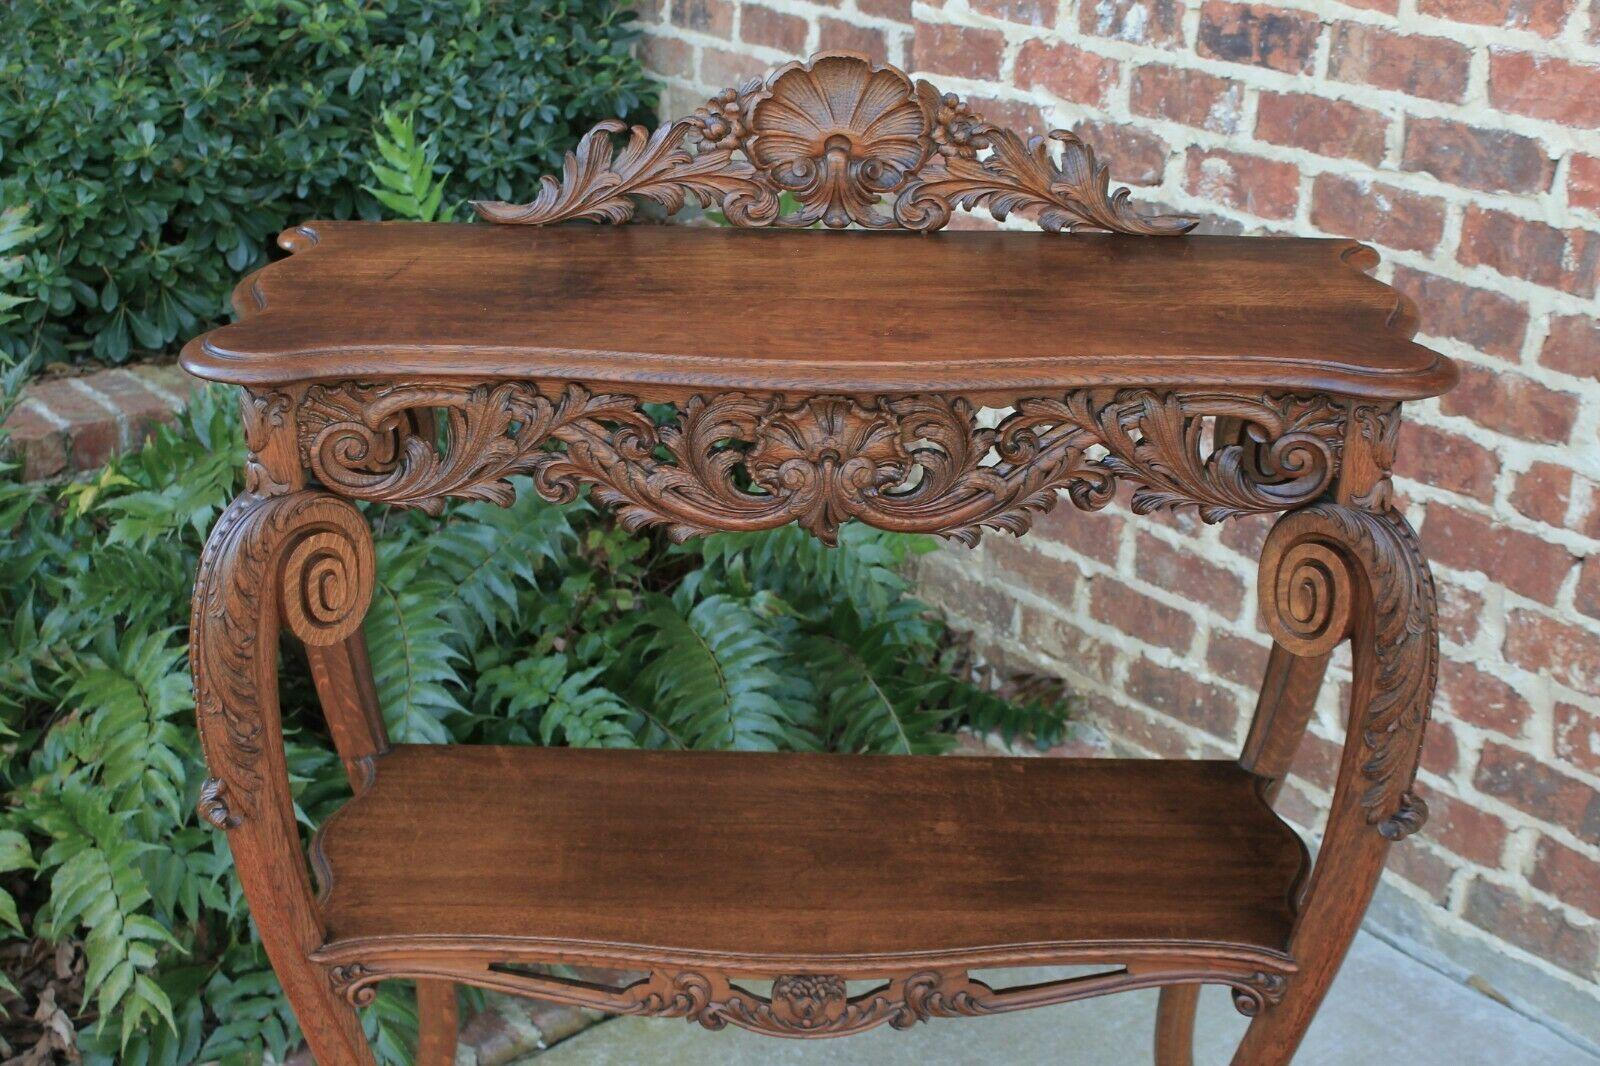 French Provincial Antique French Server Dessert Table 2-Tier Sideboard Console Sofa Table Oak